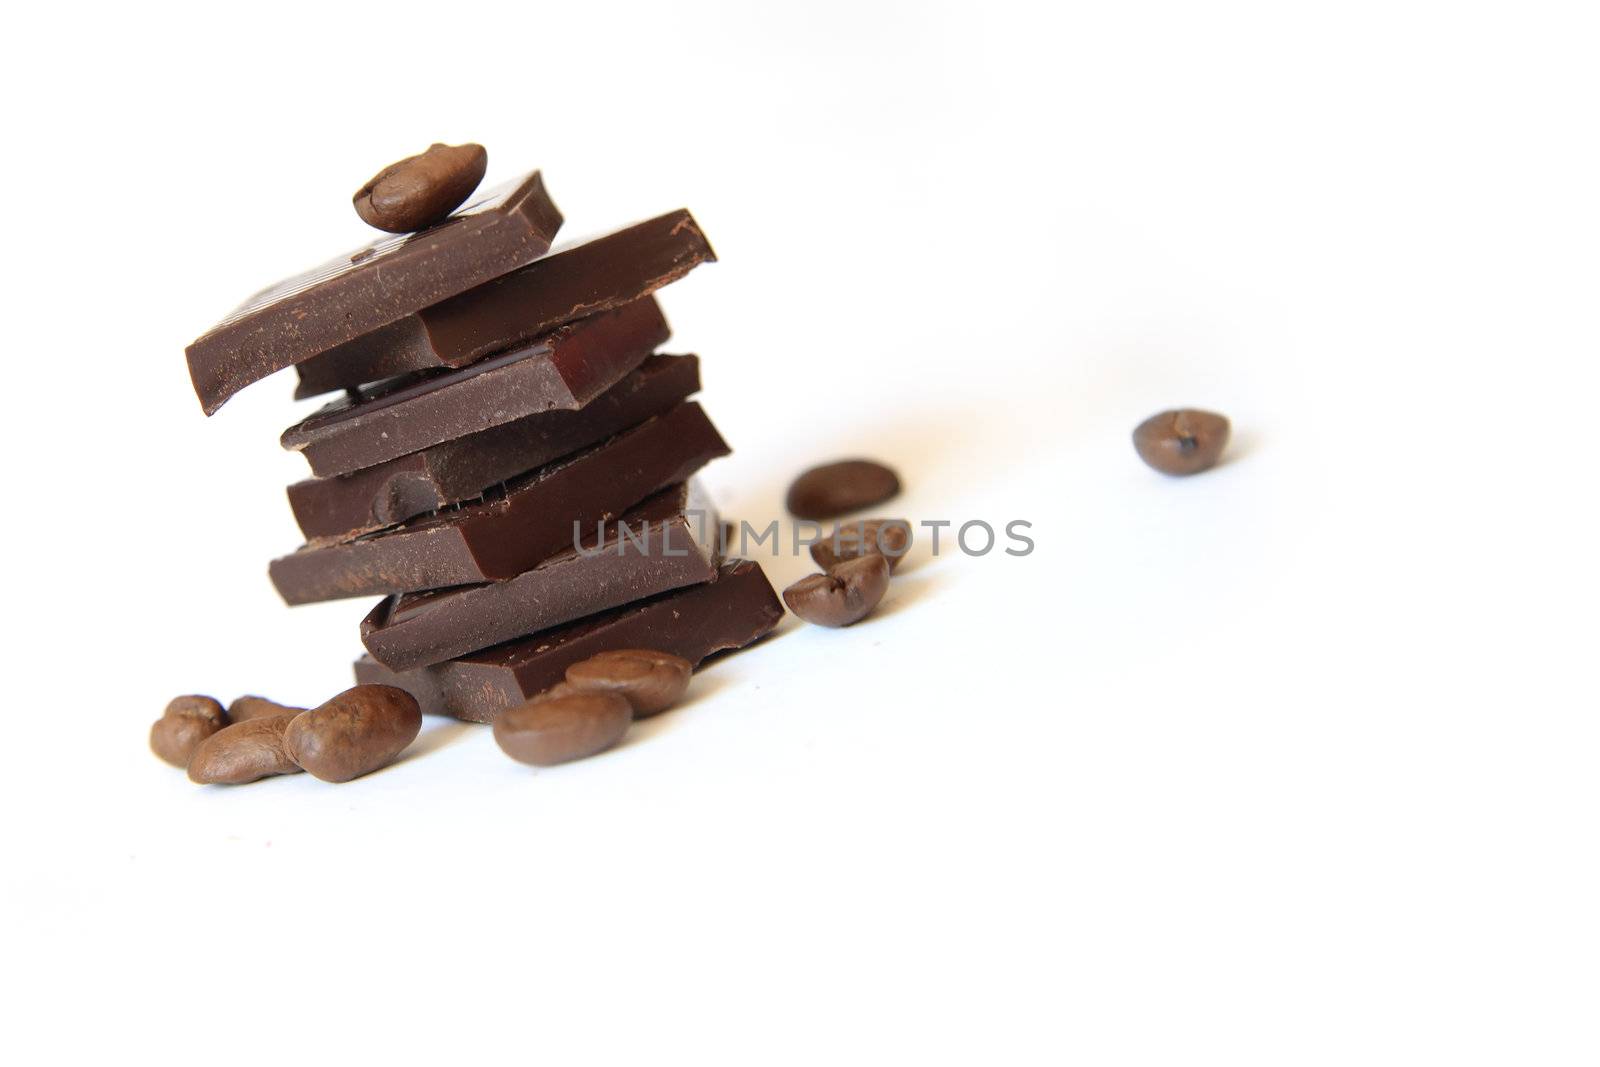 Heap of chocolate and coffee beans